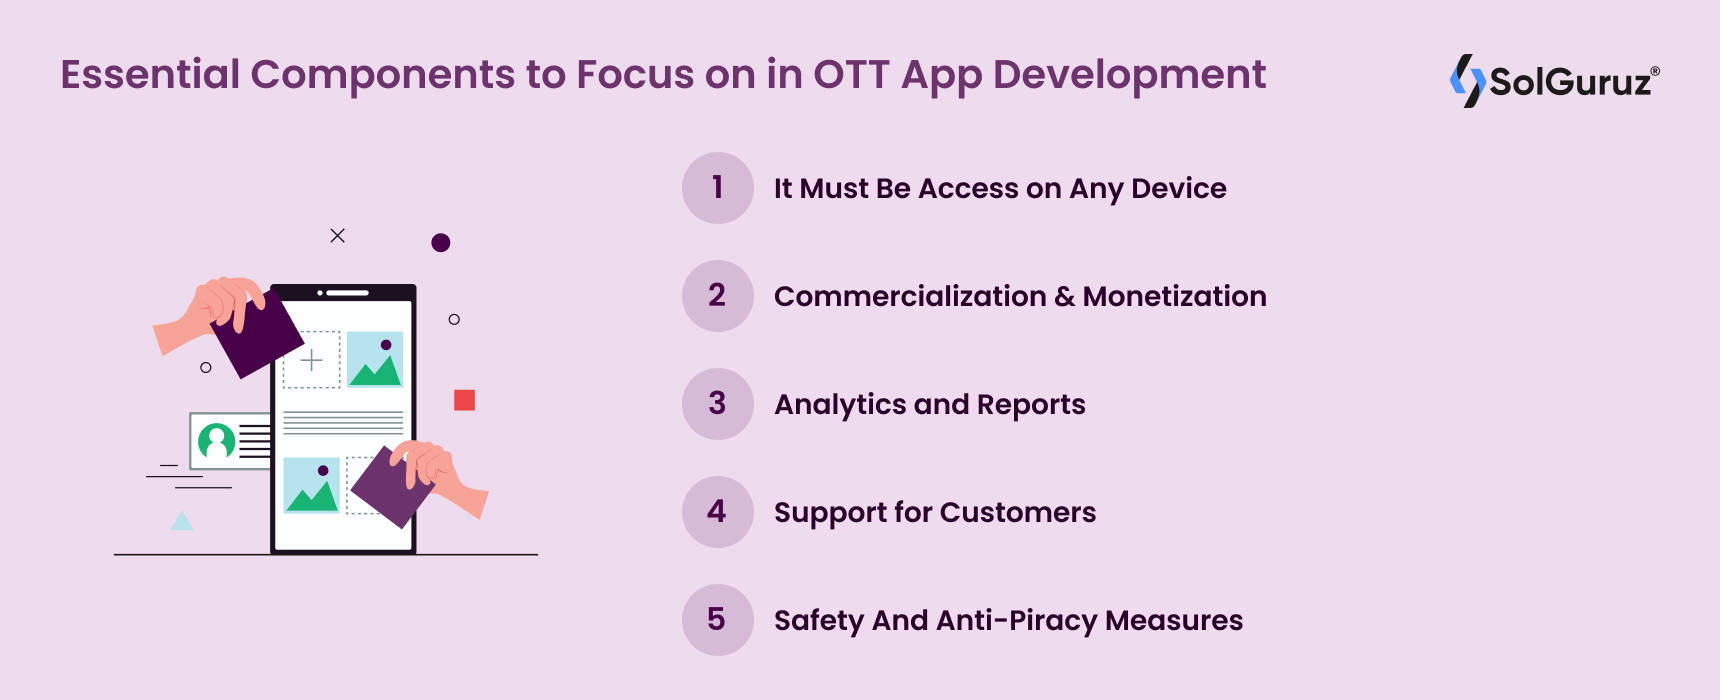 Essential Components to Focus on in OTT App Development